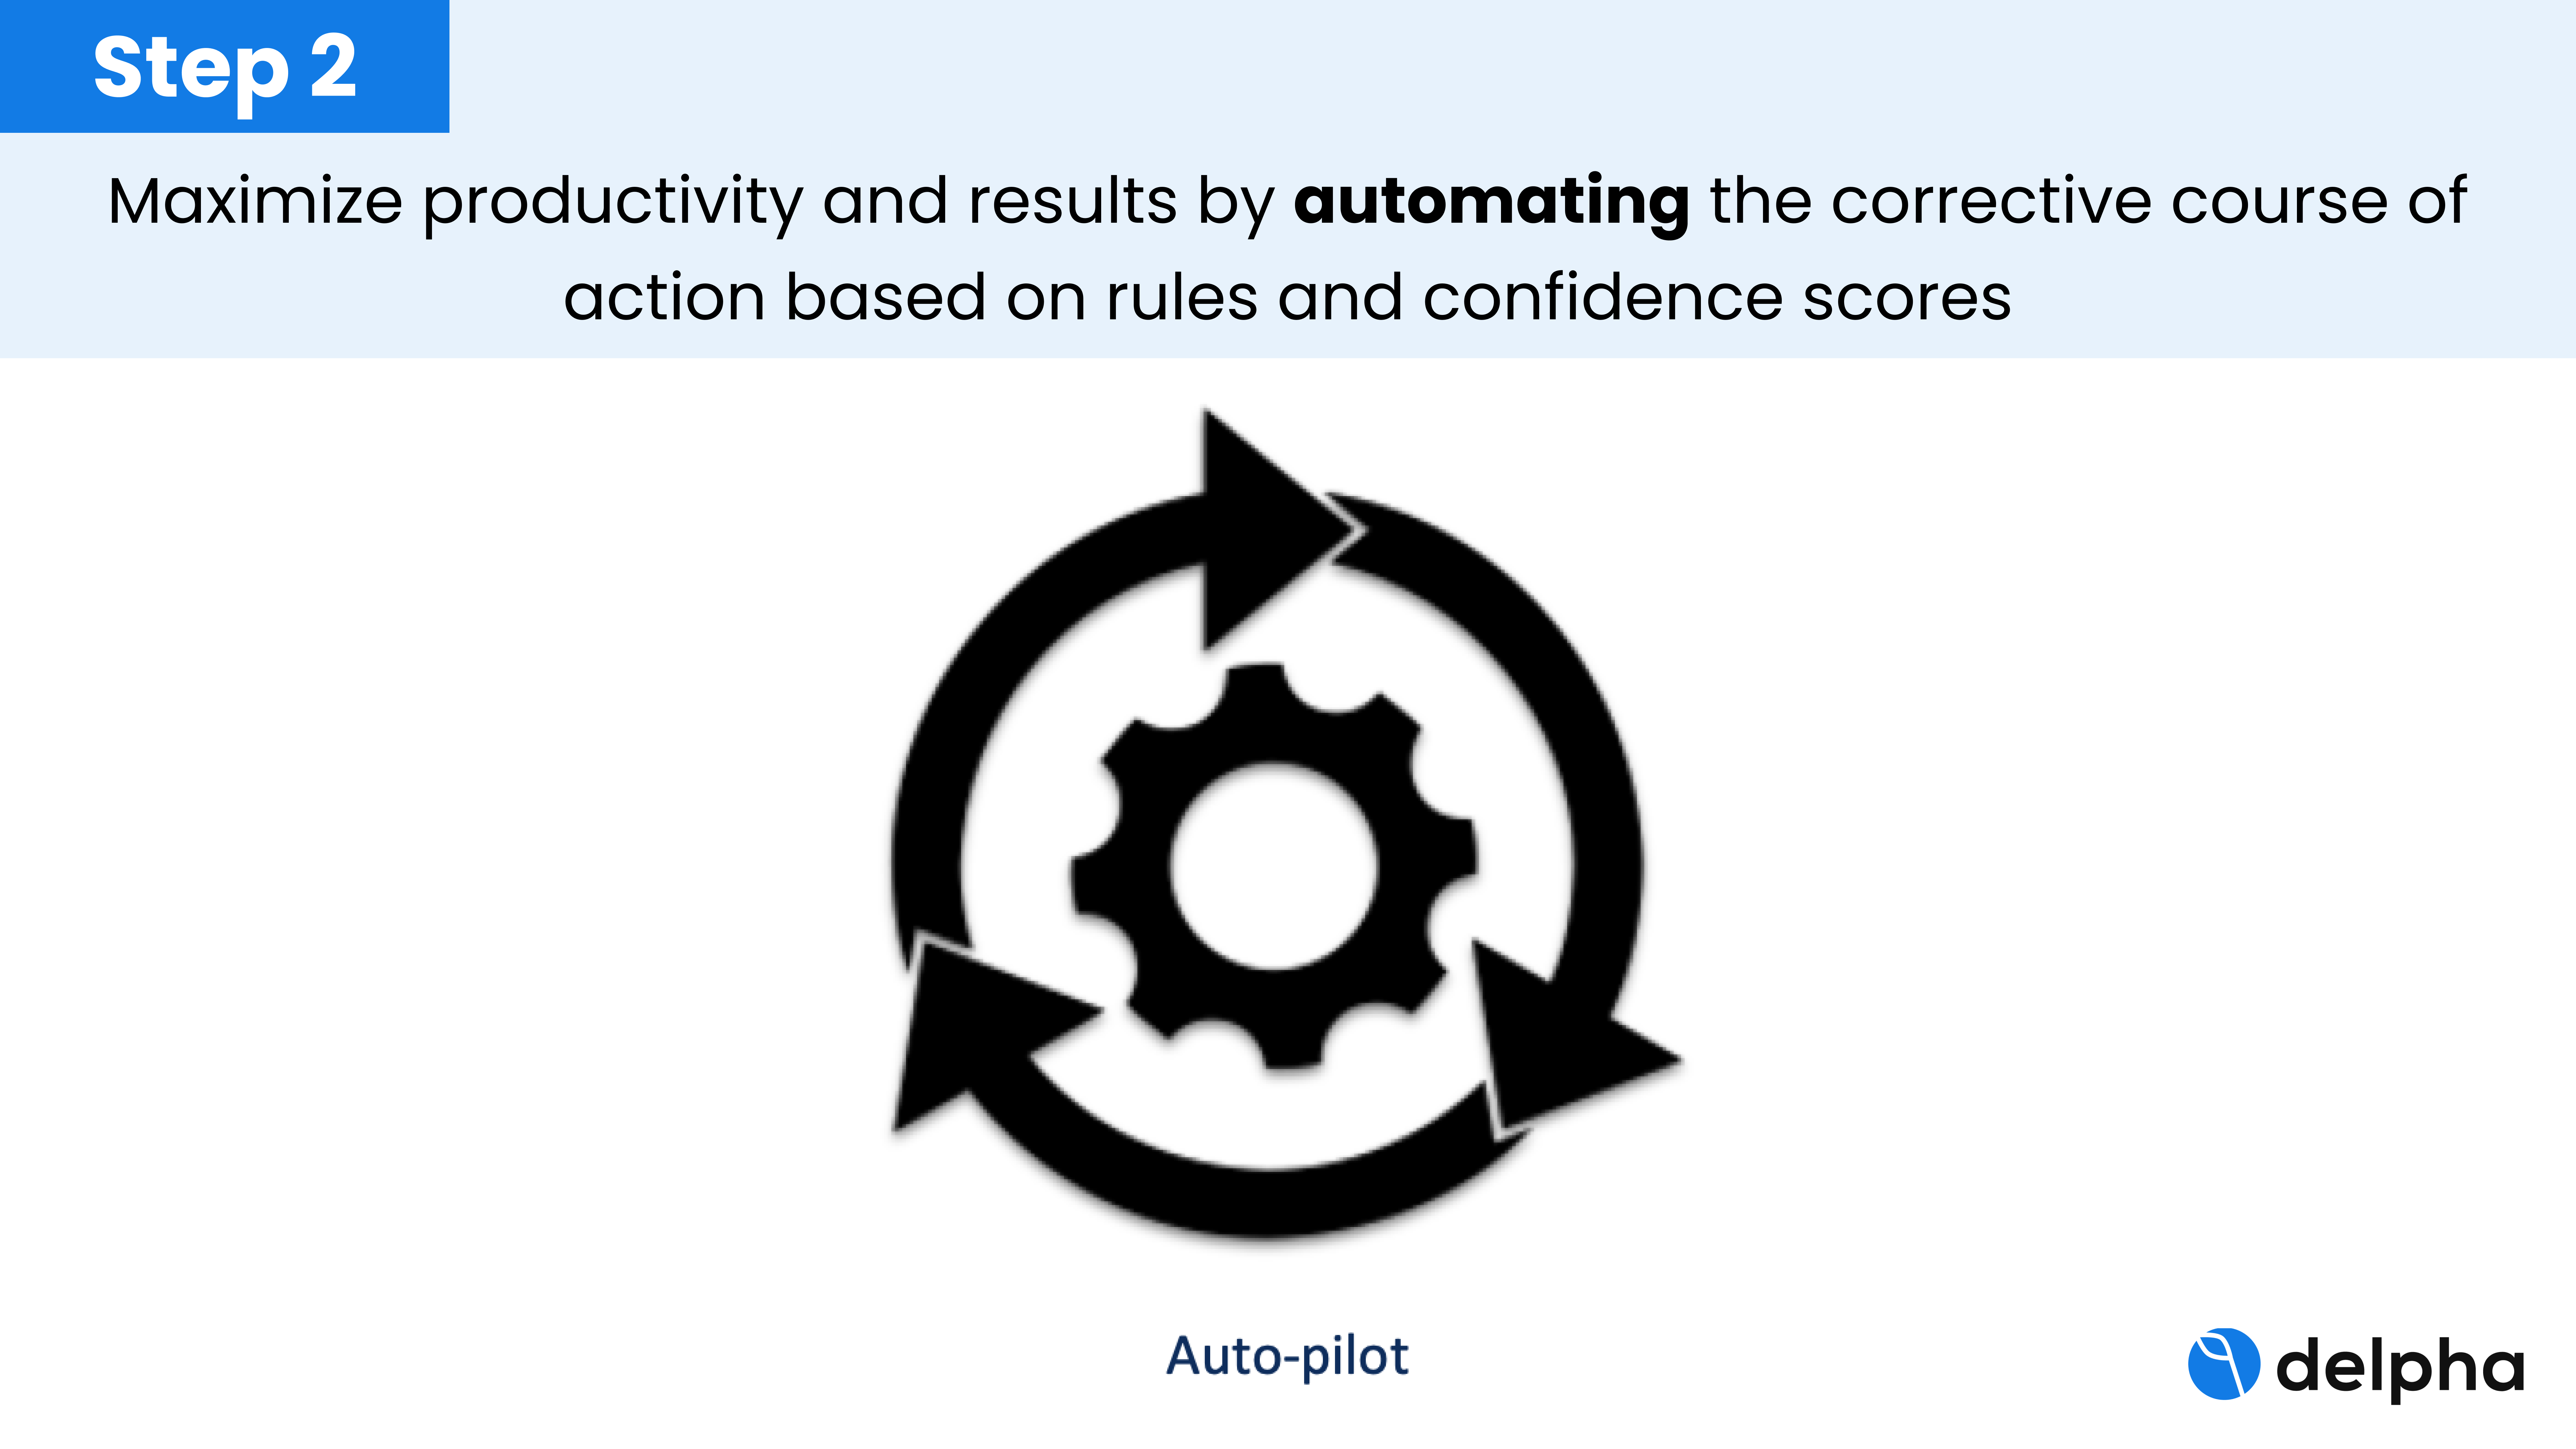 Step 2 to improve data quality is to automate as much of the solutions as possible